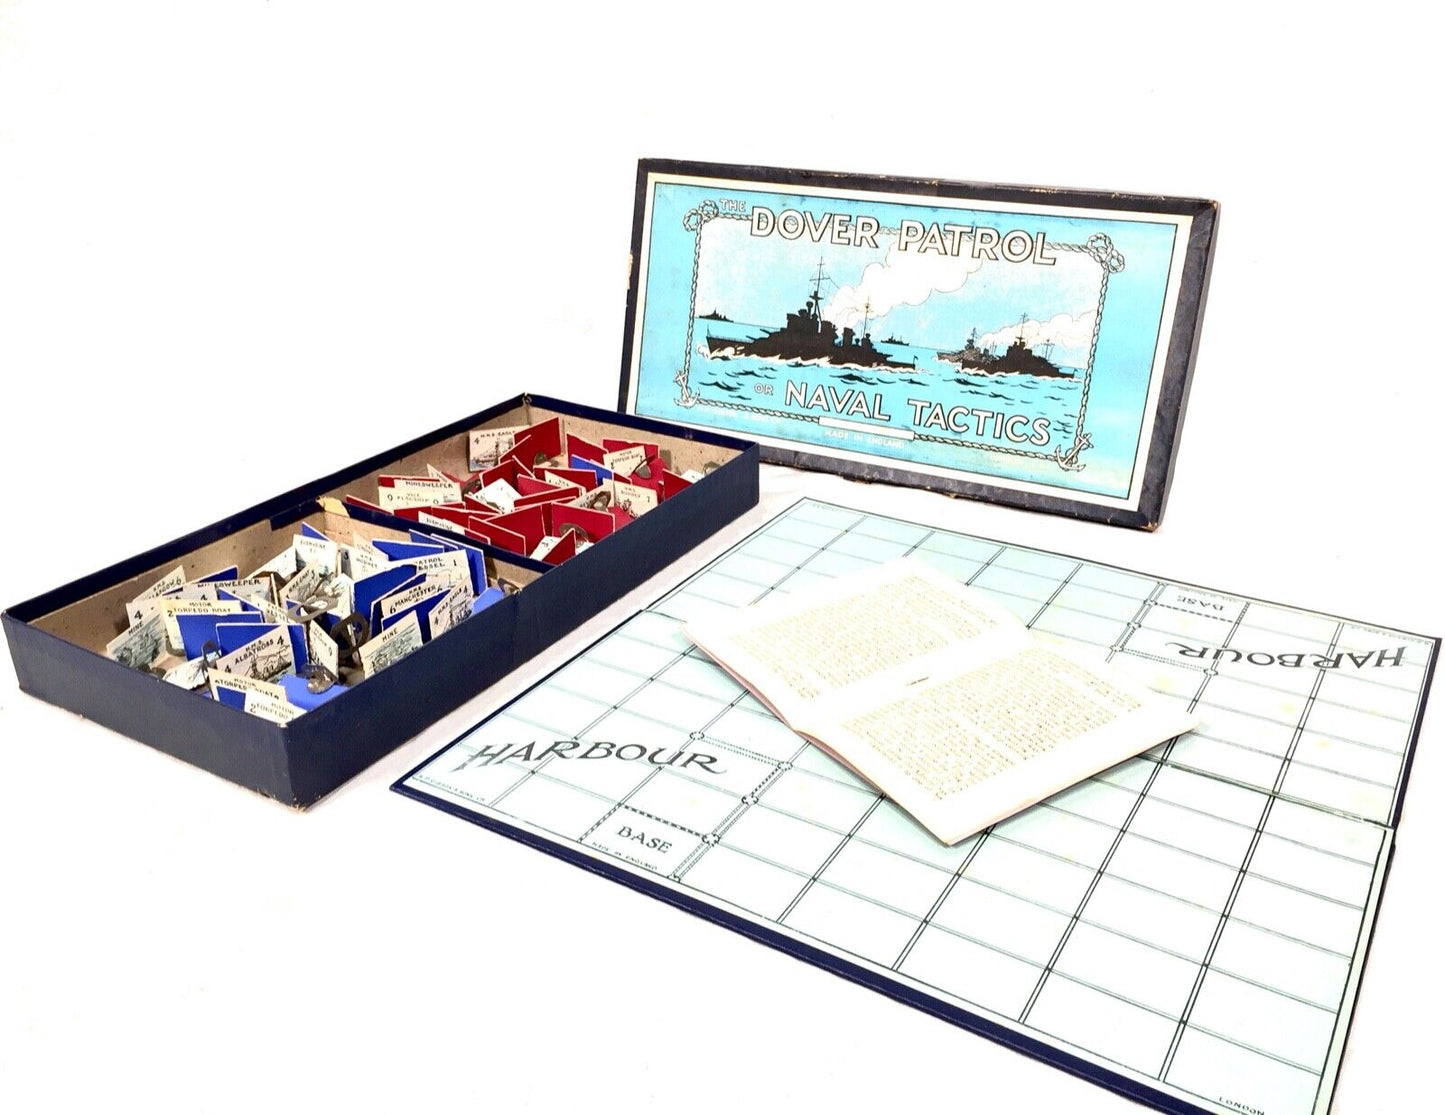 Antique Dover Patrol Board Game - Naval Tactics Game of Attack and Defence